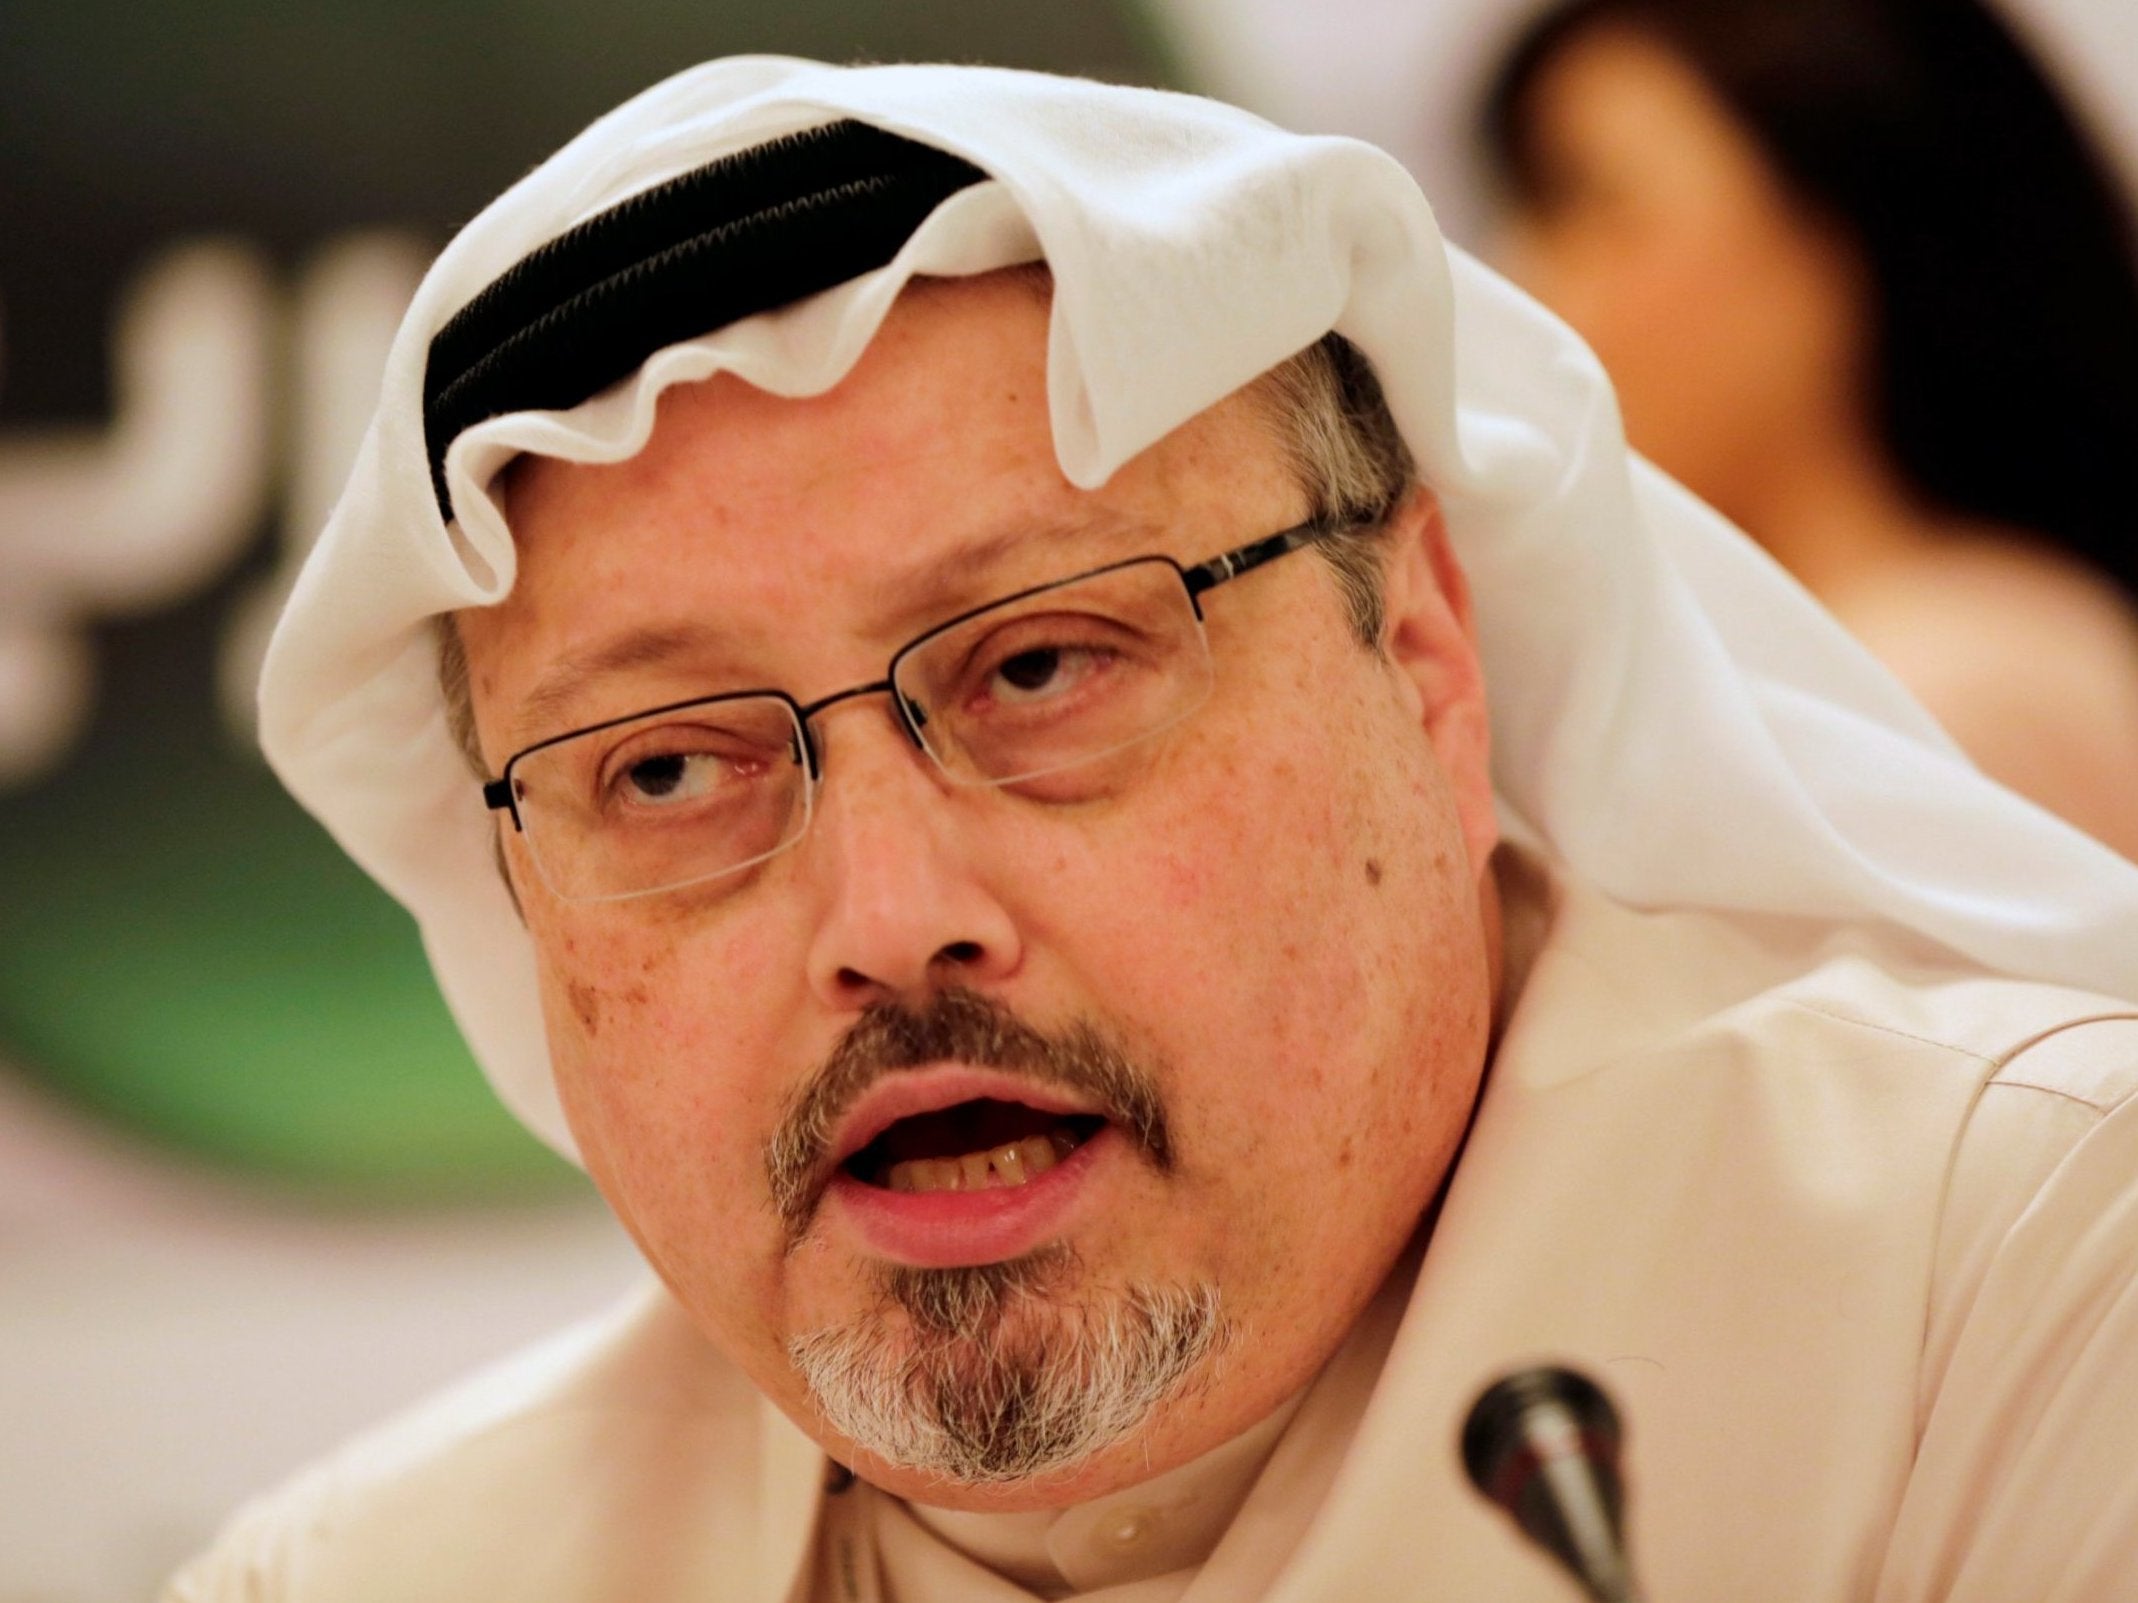 Jamal Khashoggi’s fiancée and friends say he never left the Saudi consulate, and they believe it’s likely he remains inside the building